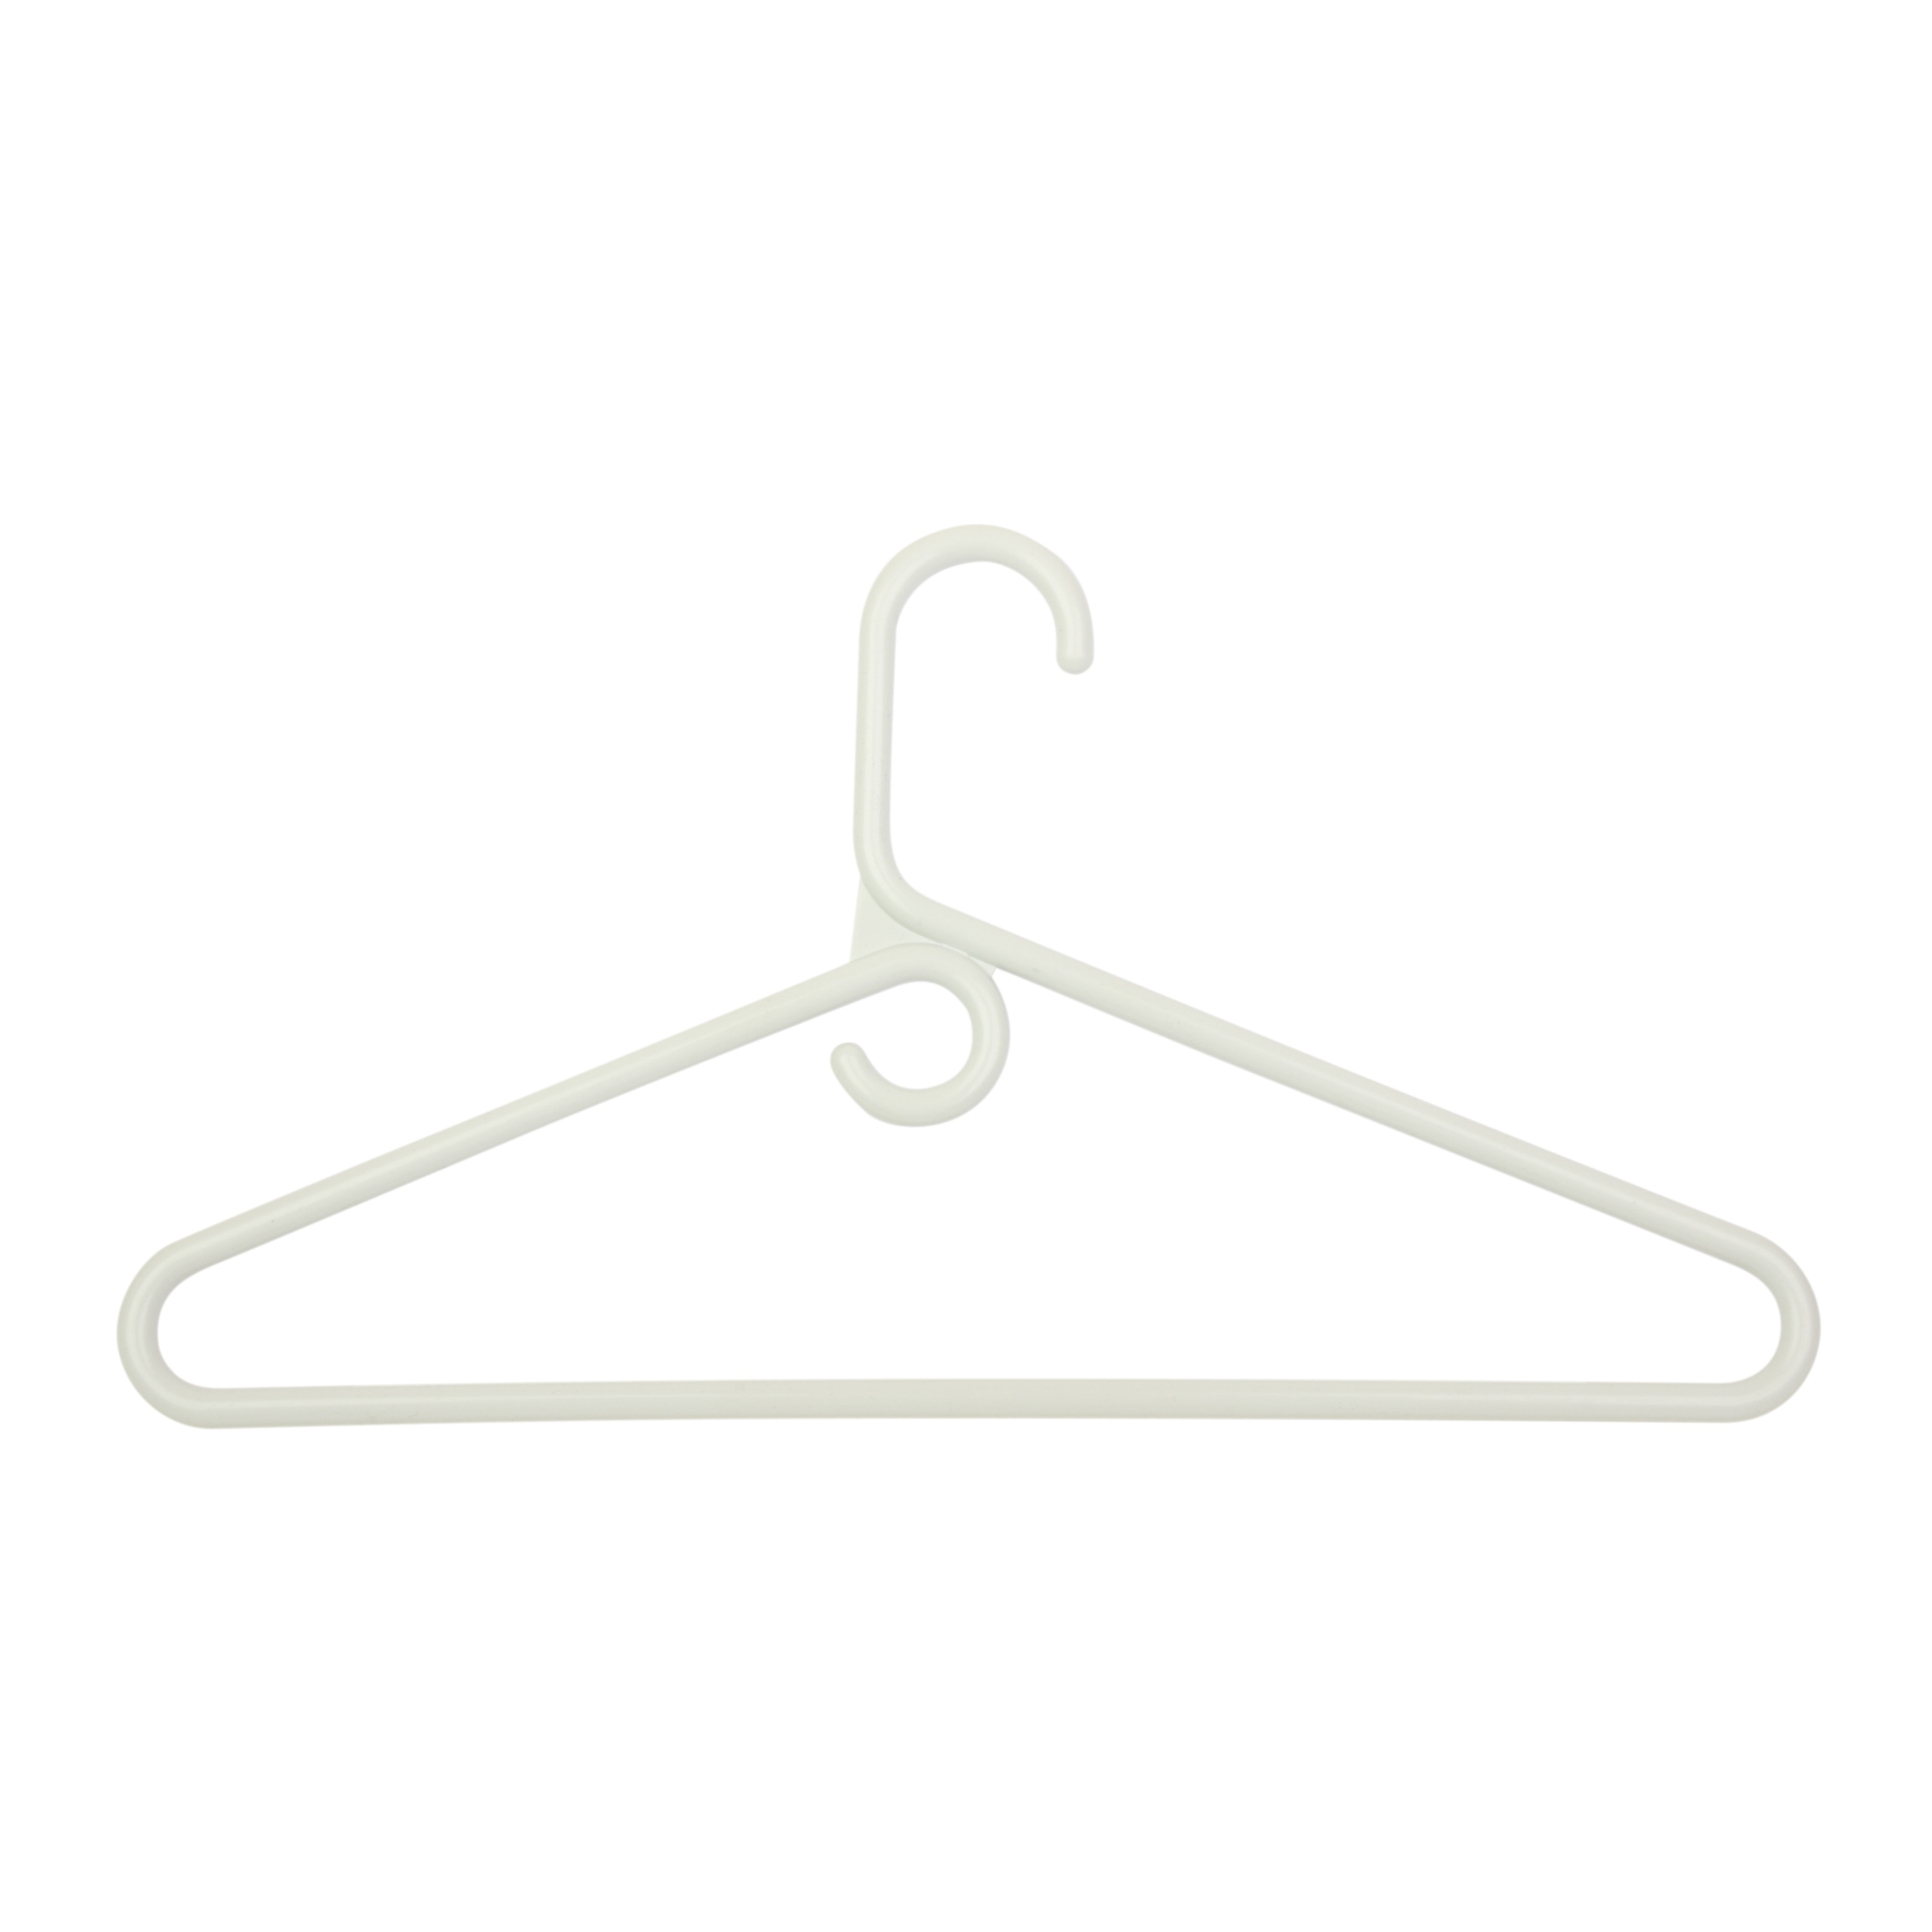 https://ak1.ostkcdn.com/images/products/is/images/direct/0a9c832d39a38b8a43efe78387539080a086bba0/Heavy-duty-Tubular-Hangers%2C-18-Pack.jpg